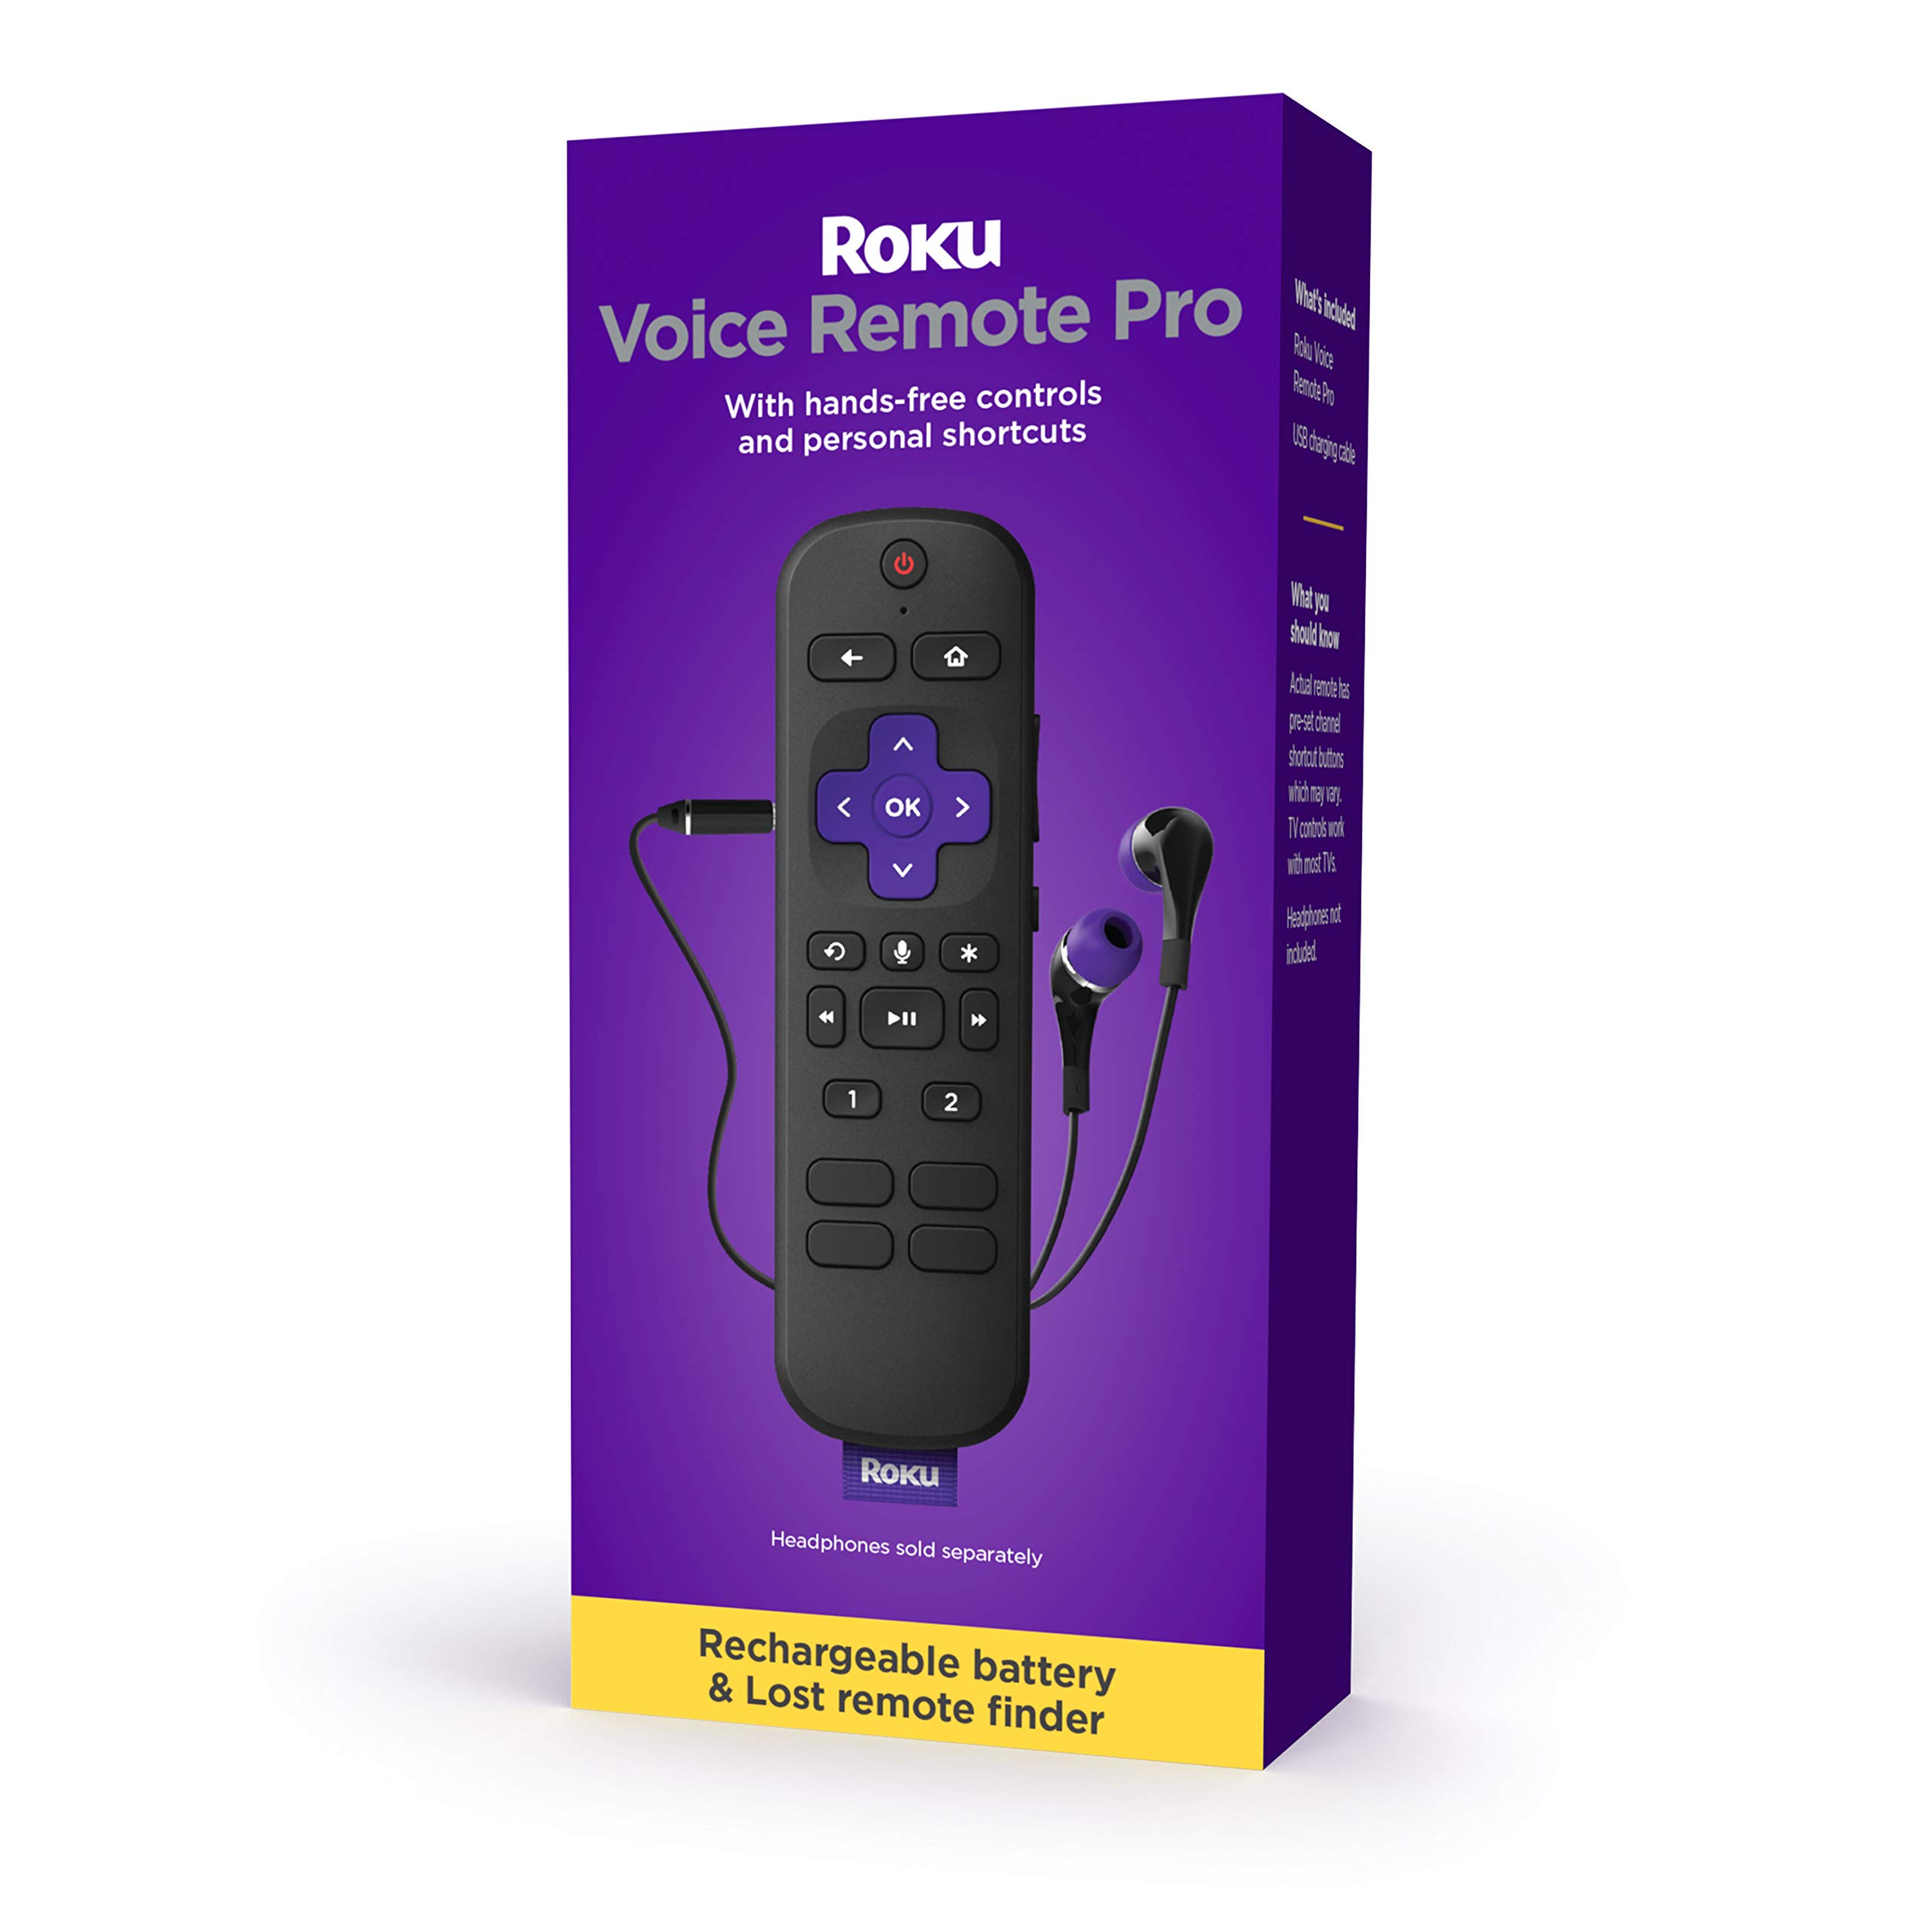 NEW Roku Voice Remote Pro - USB charging (no more batteries!) - $28.97/FS at Amazon